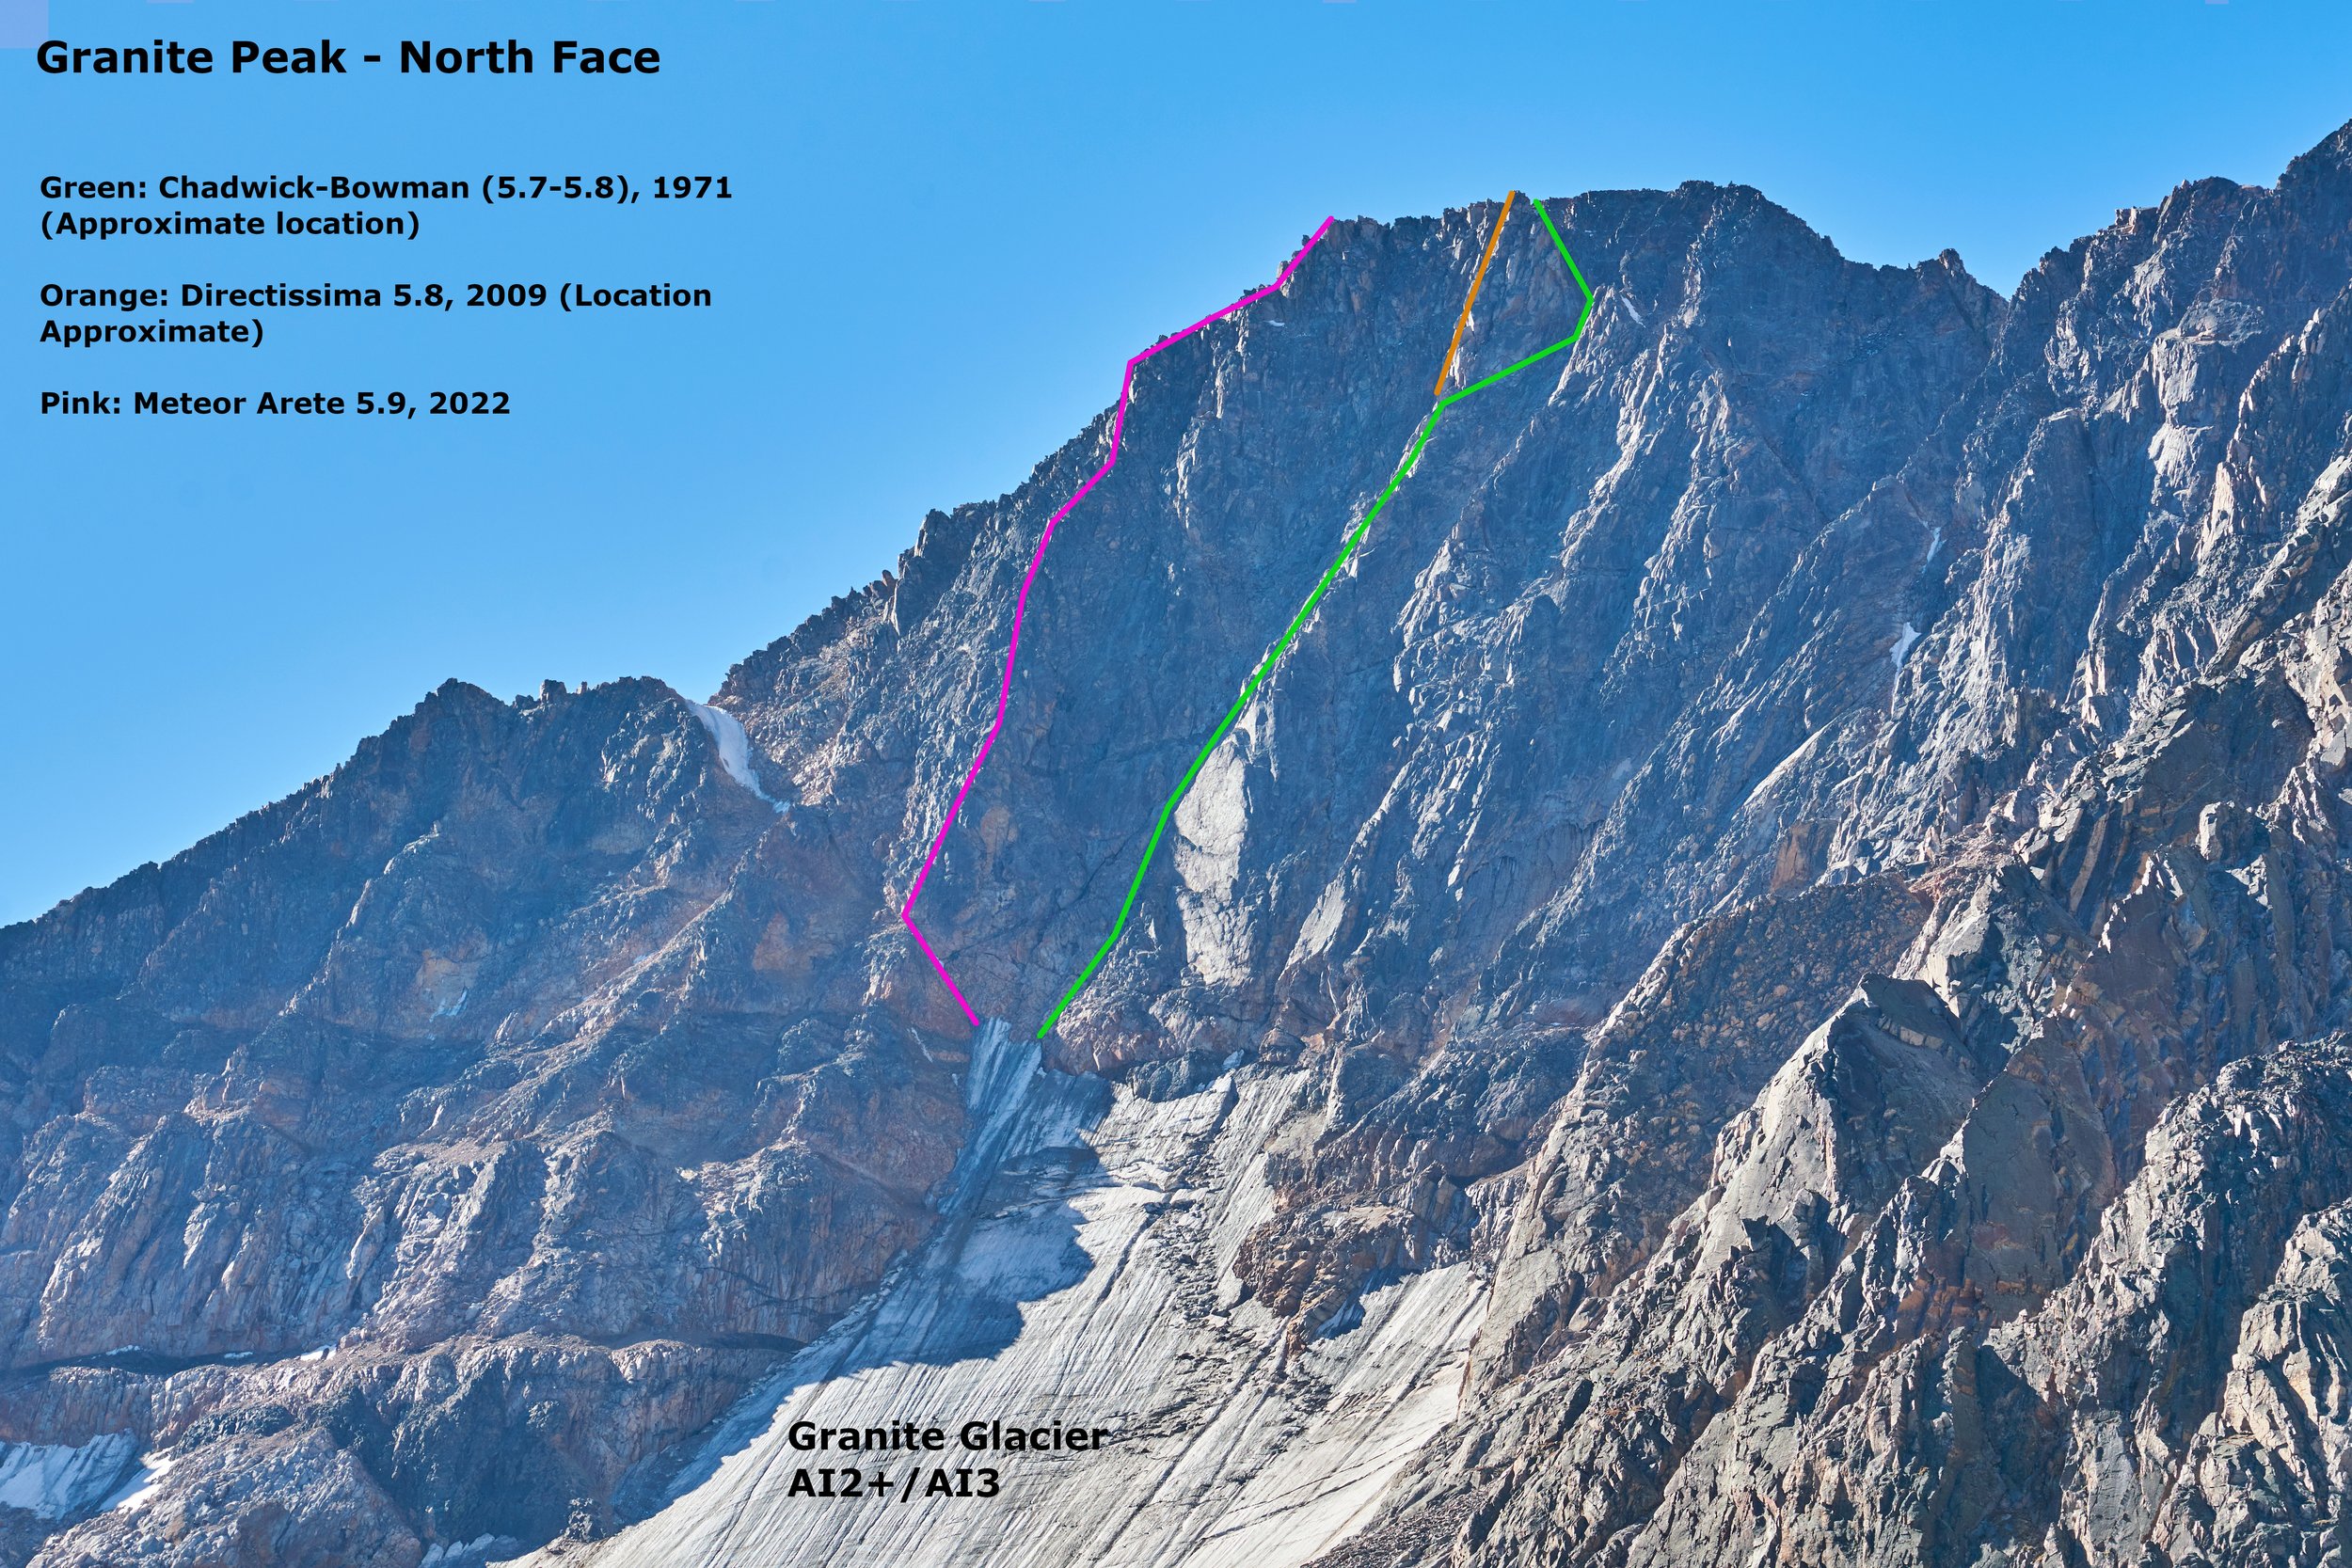 My best attempt at a route overlay of the North Face of Granite. Location of 2 existing routes is very approximate.